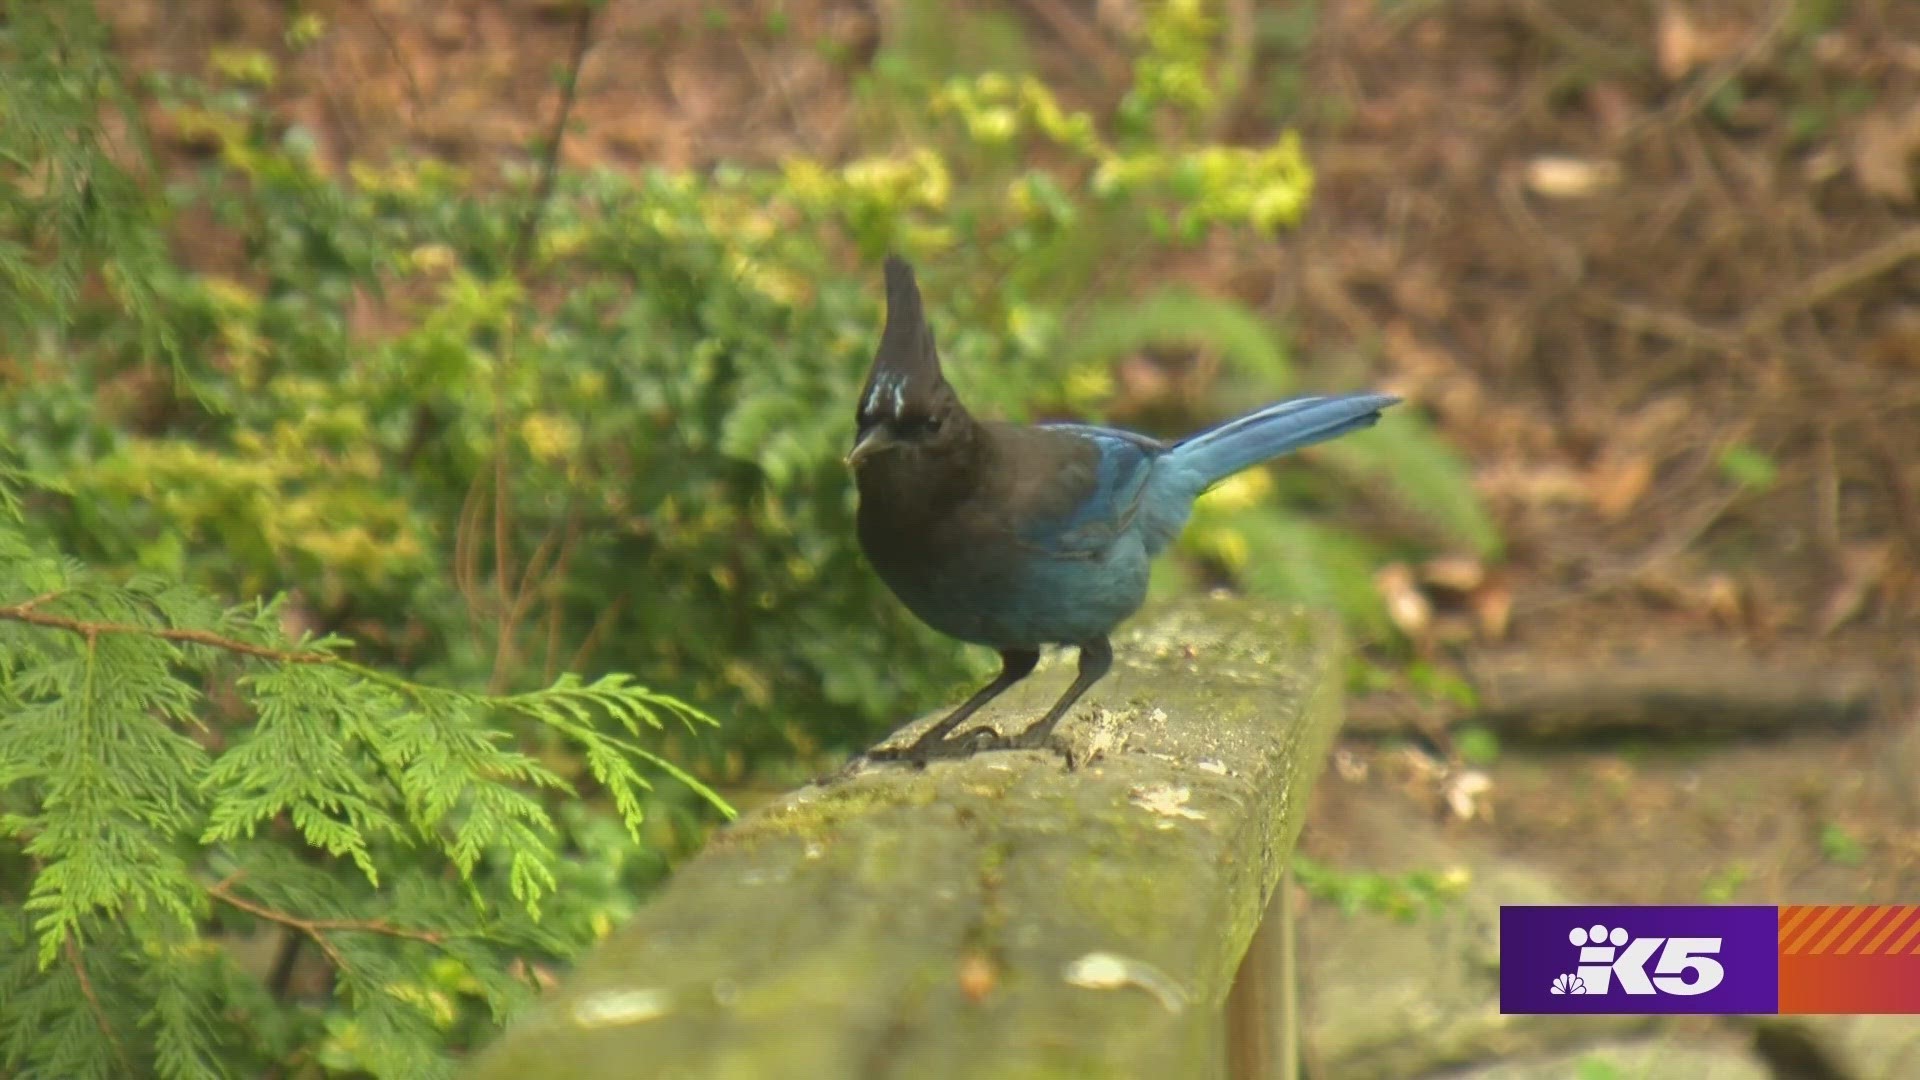 Research suggests birdwatching is beneficial for mental health so the more birds you recognize, the better you feel. #k5evening